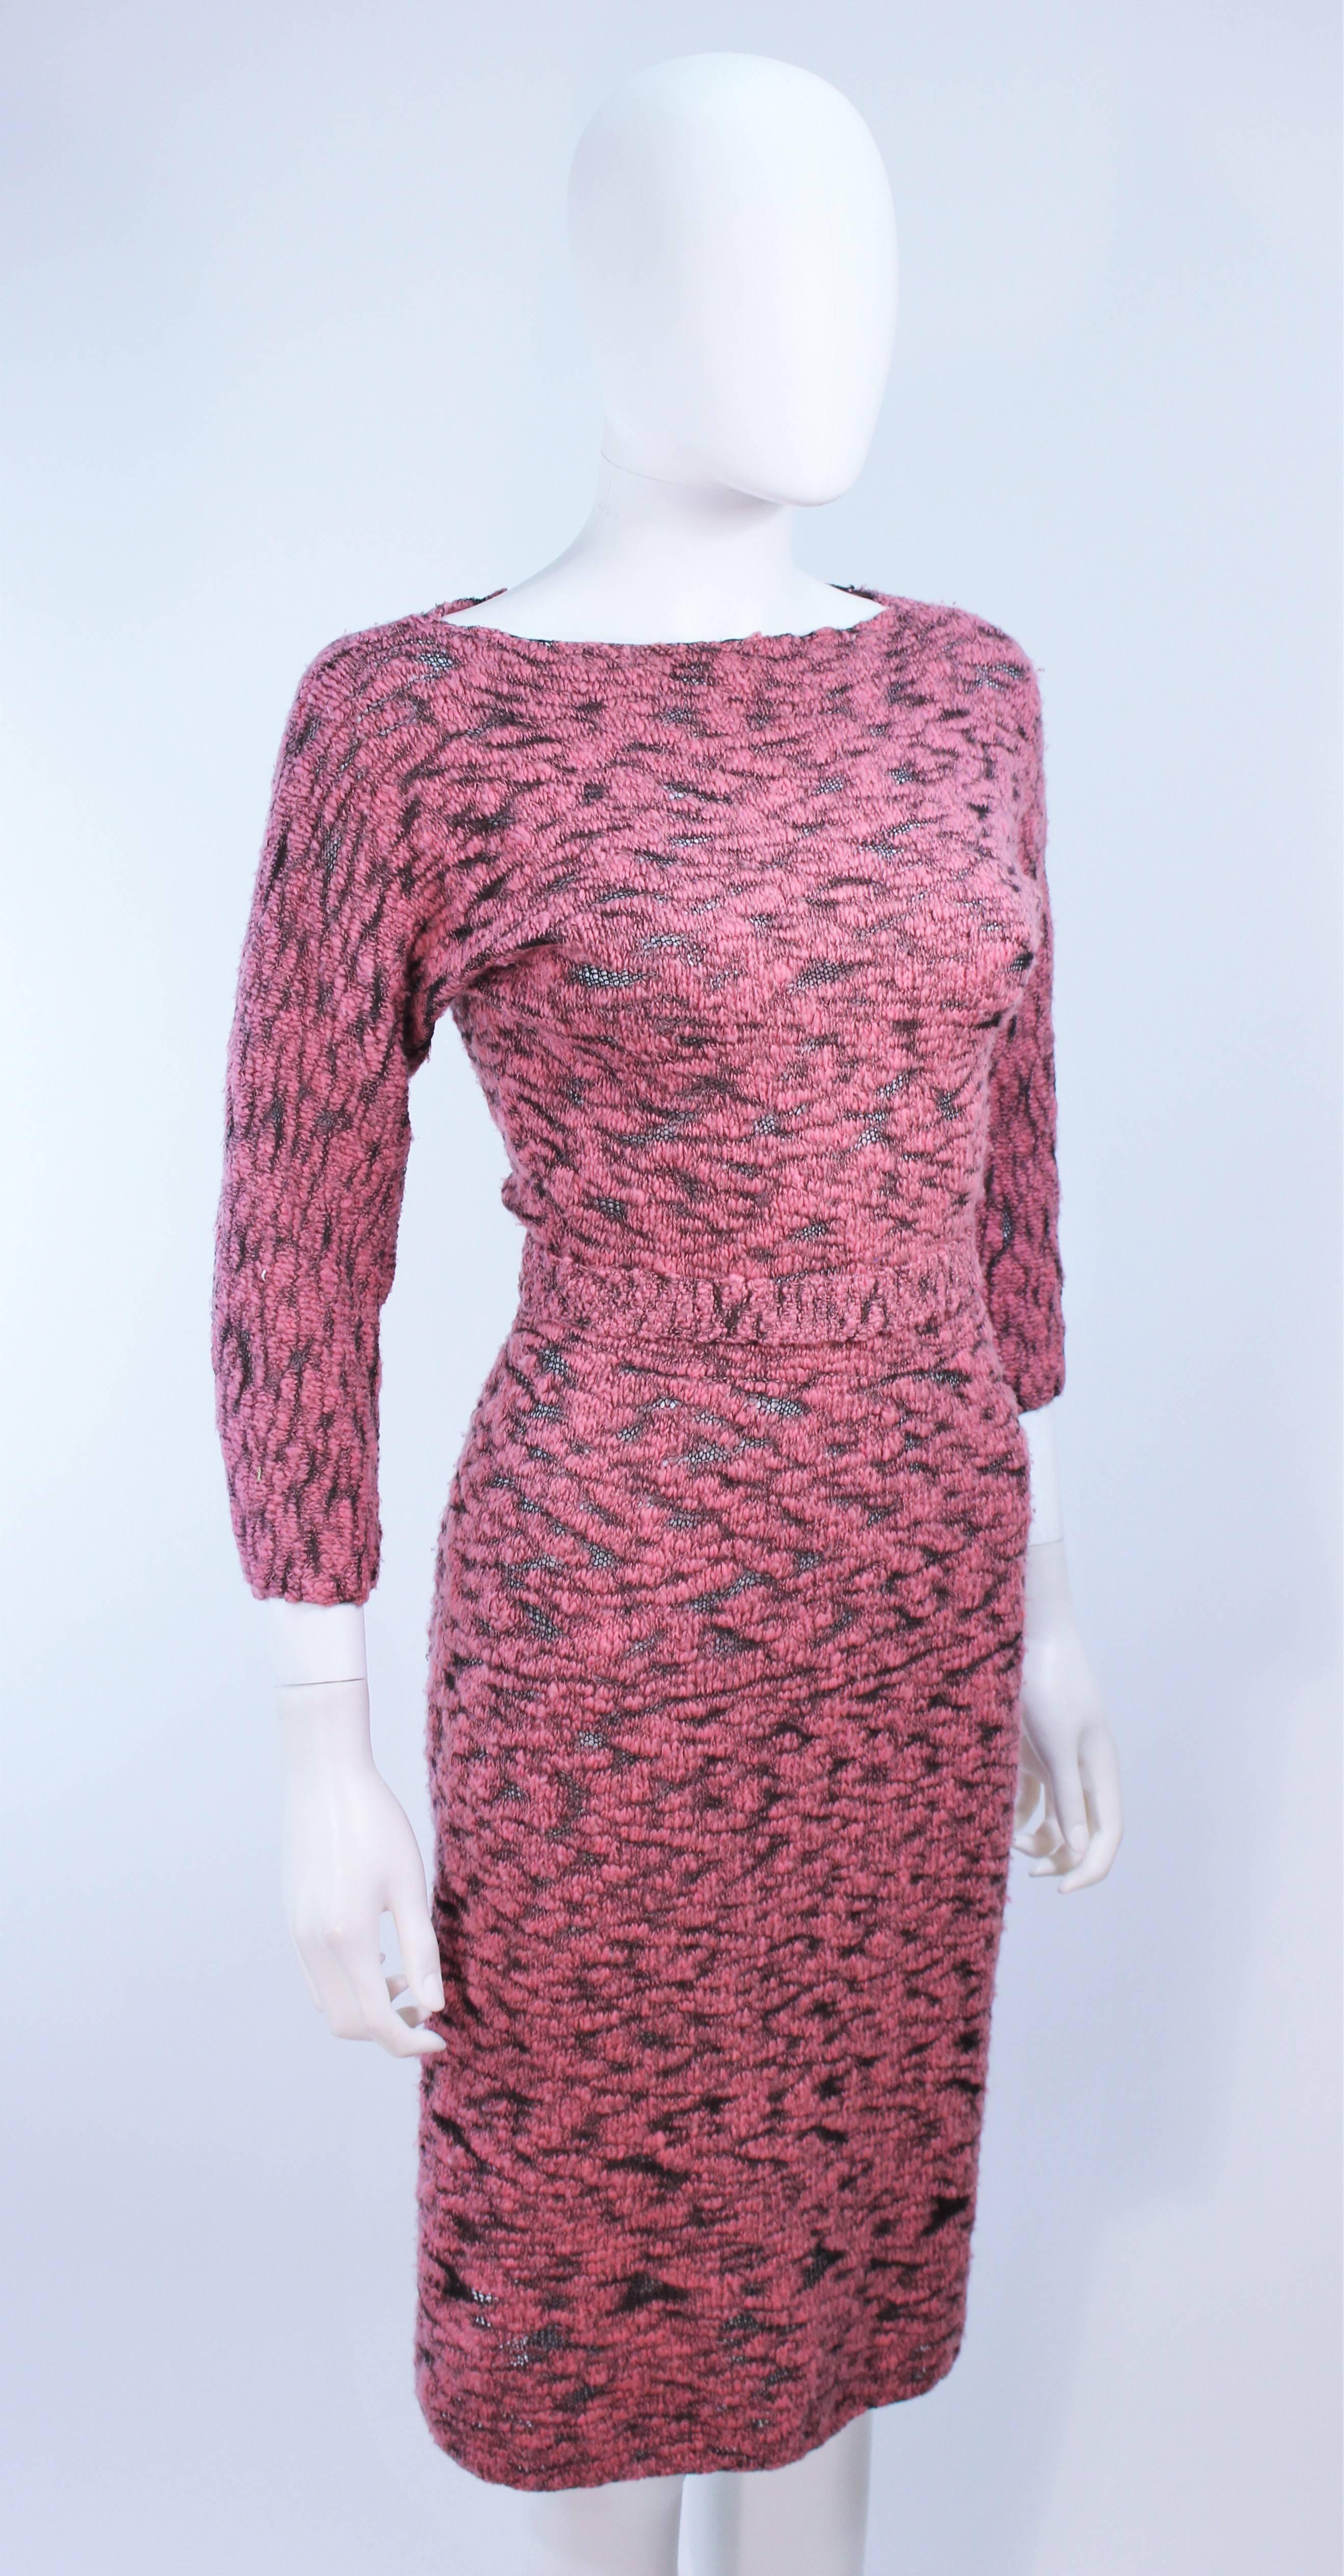 SYDNEY'S BEVERLY HILLS 1960's Pink & Black Stretch Knit Cocktail Dress Size 2 4  In Excellent Condition For Sale In Los Angeles, CA